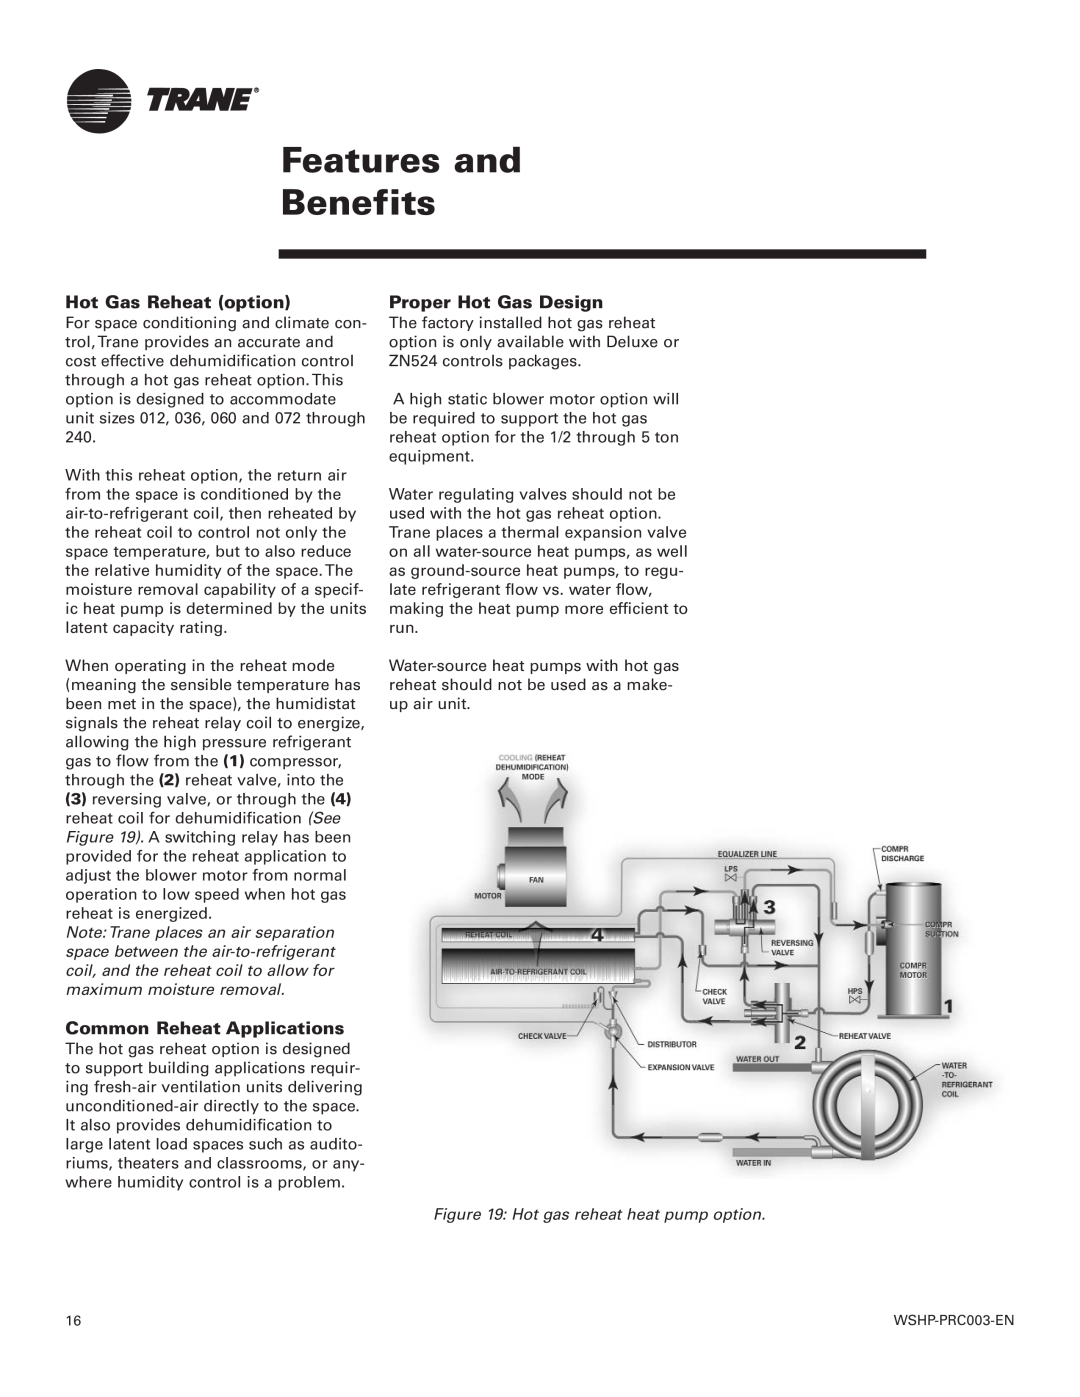 Trane 120 GEH manual Features and Benefits, Hot Gas Reheat option, Common Reheat Applications, Proper Hot Gas Design 